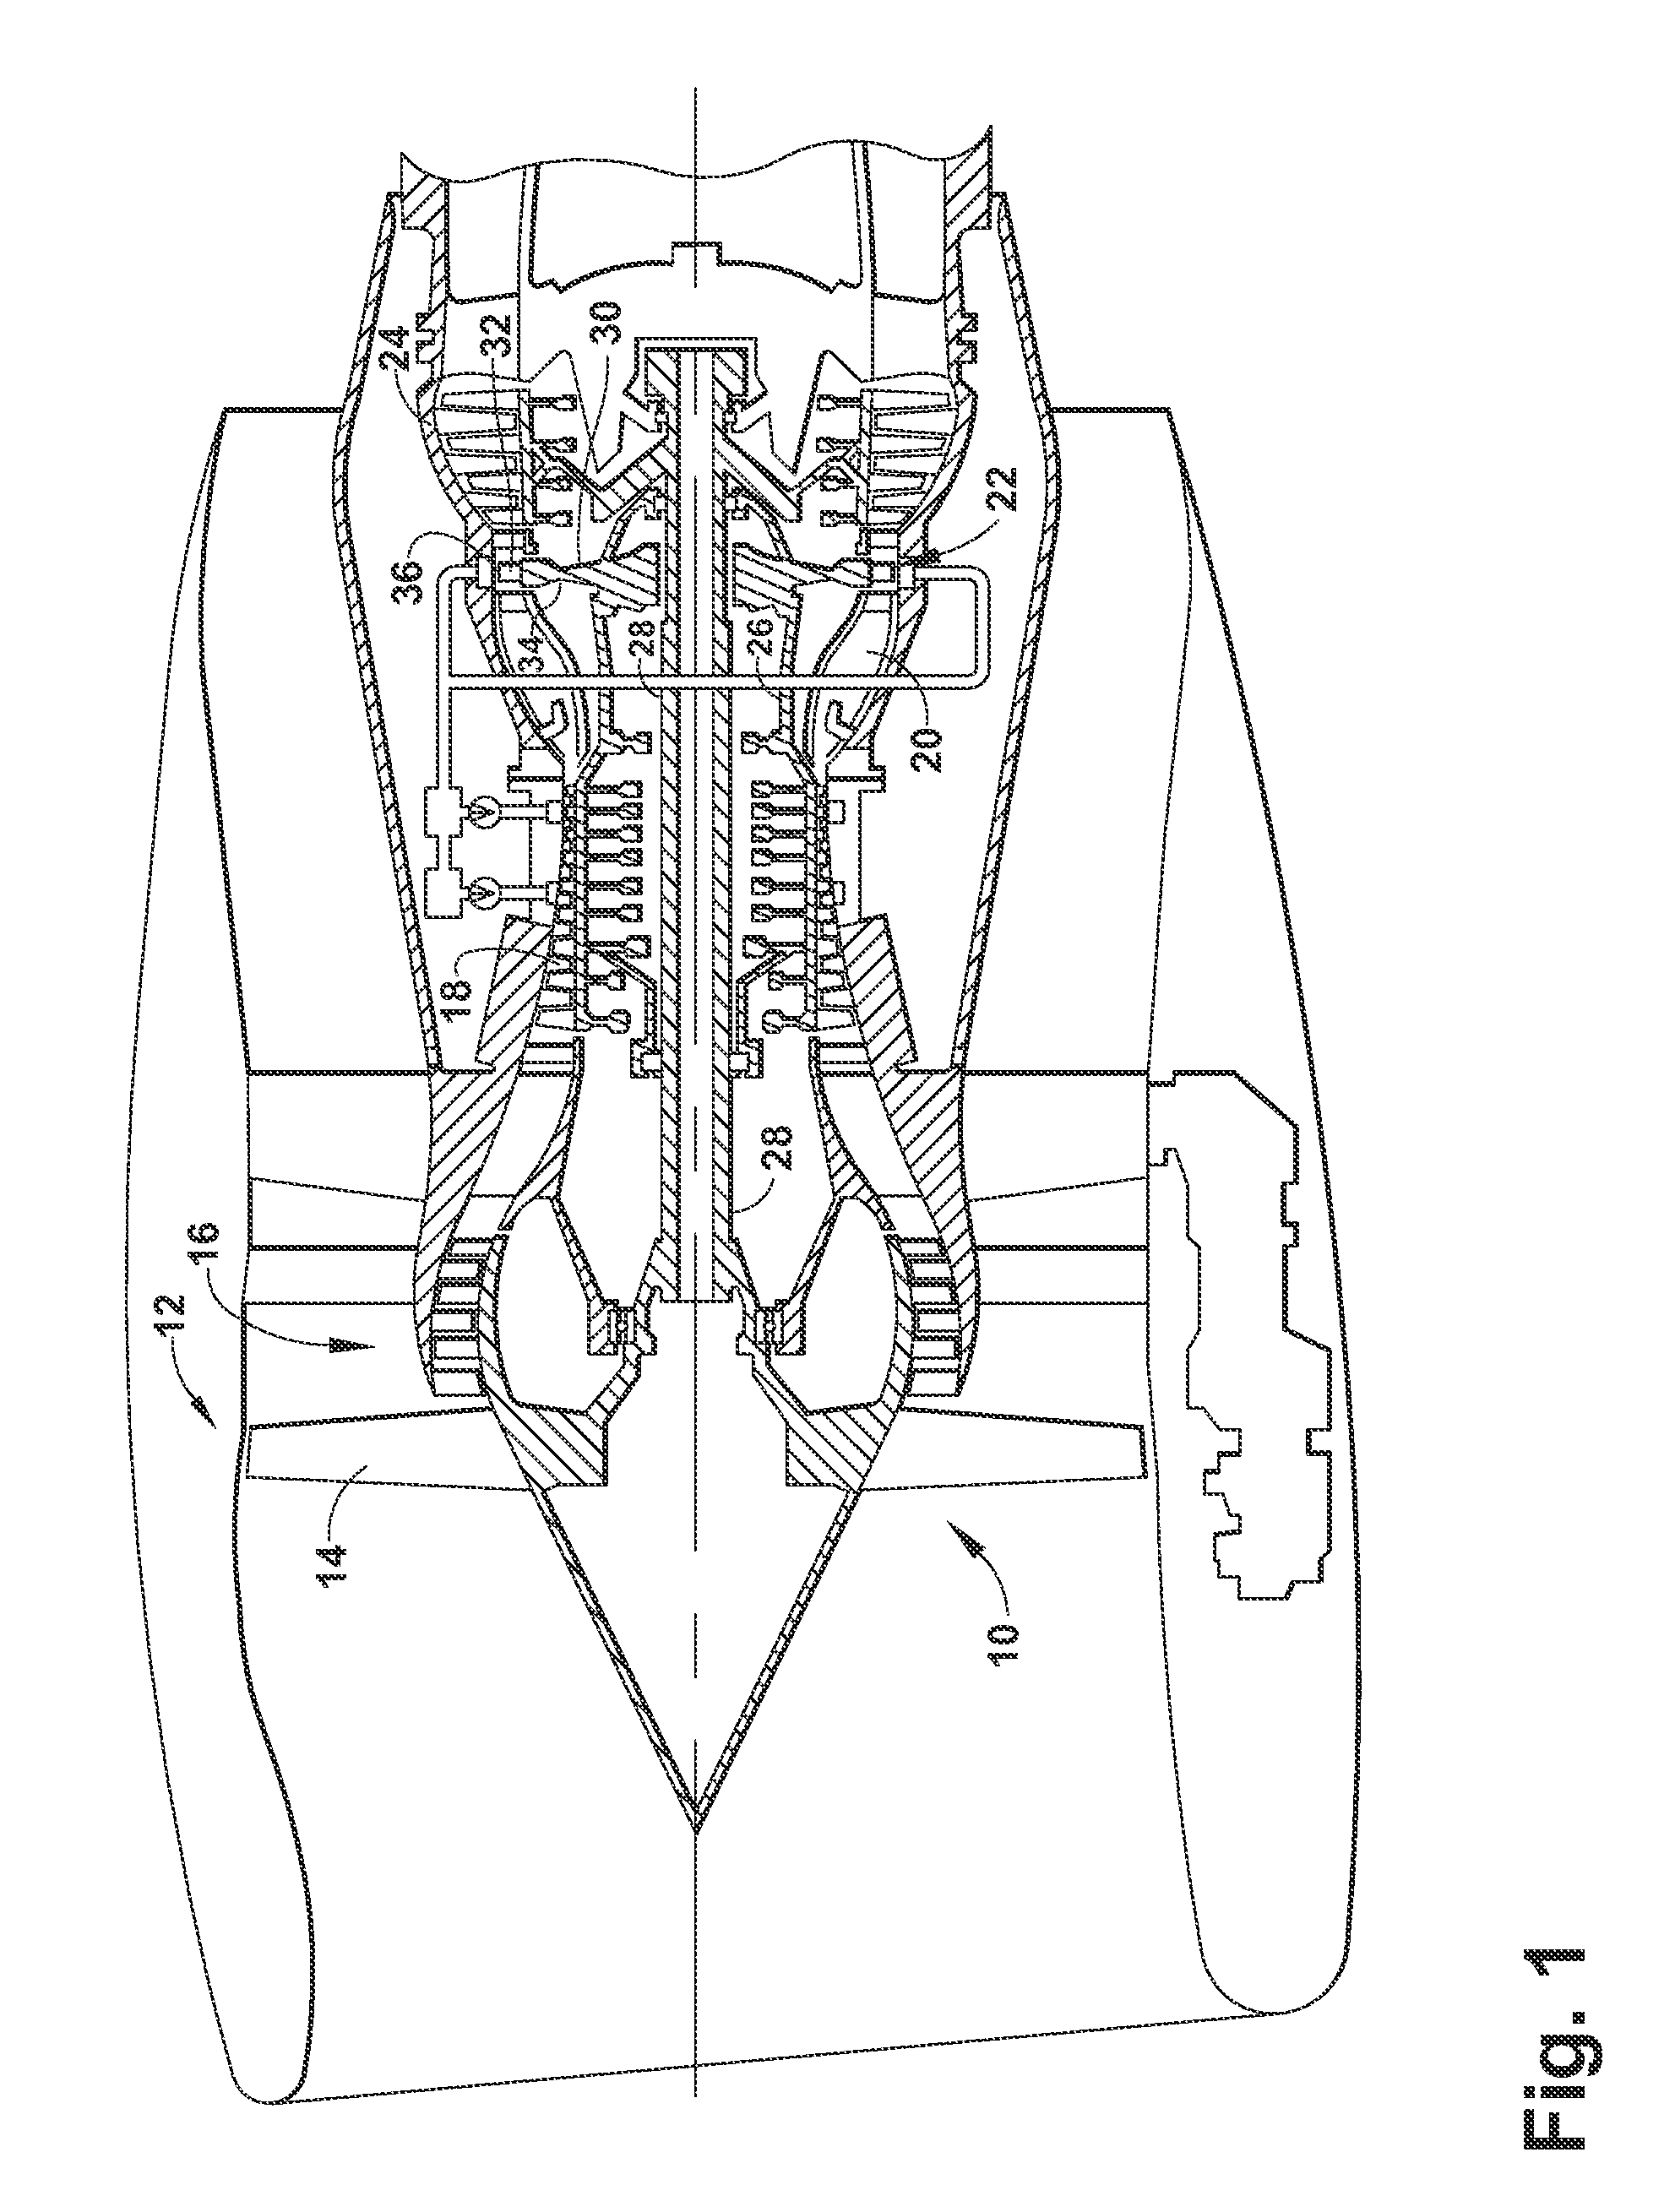 Apparatus for generating power from a turbine engine